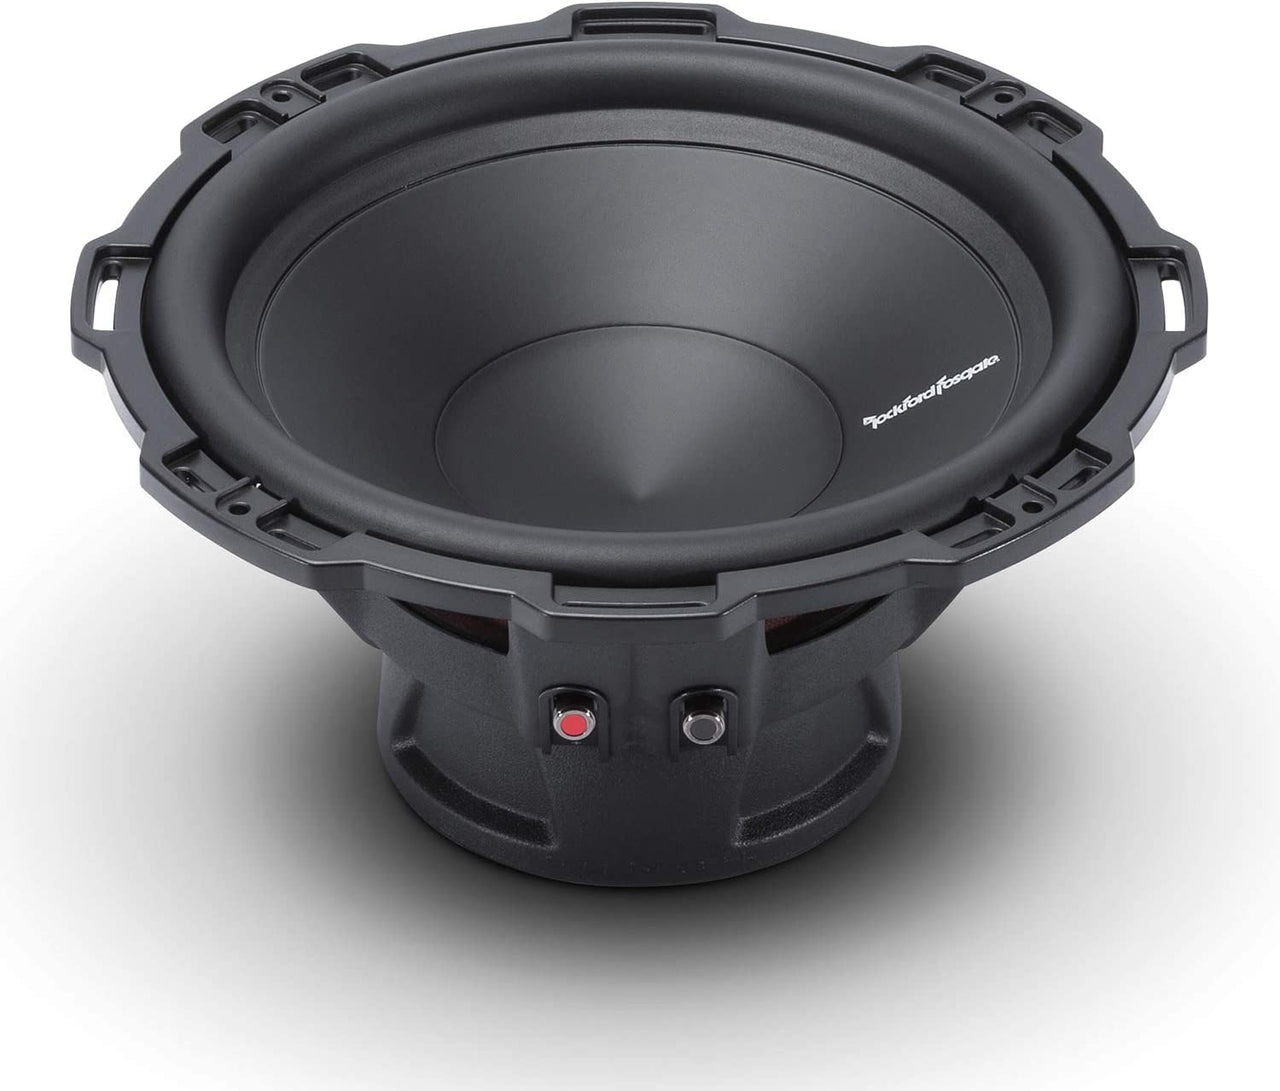 Rockford Fosgate Punch P1S4-12 12" 500W 4-Ohm Power Car Audio Subwoofers Subs